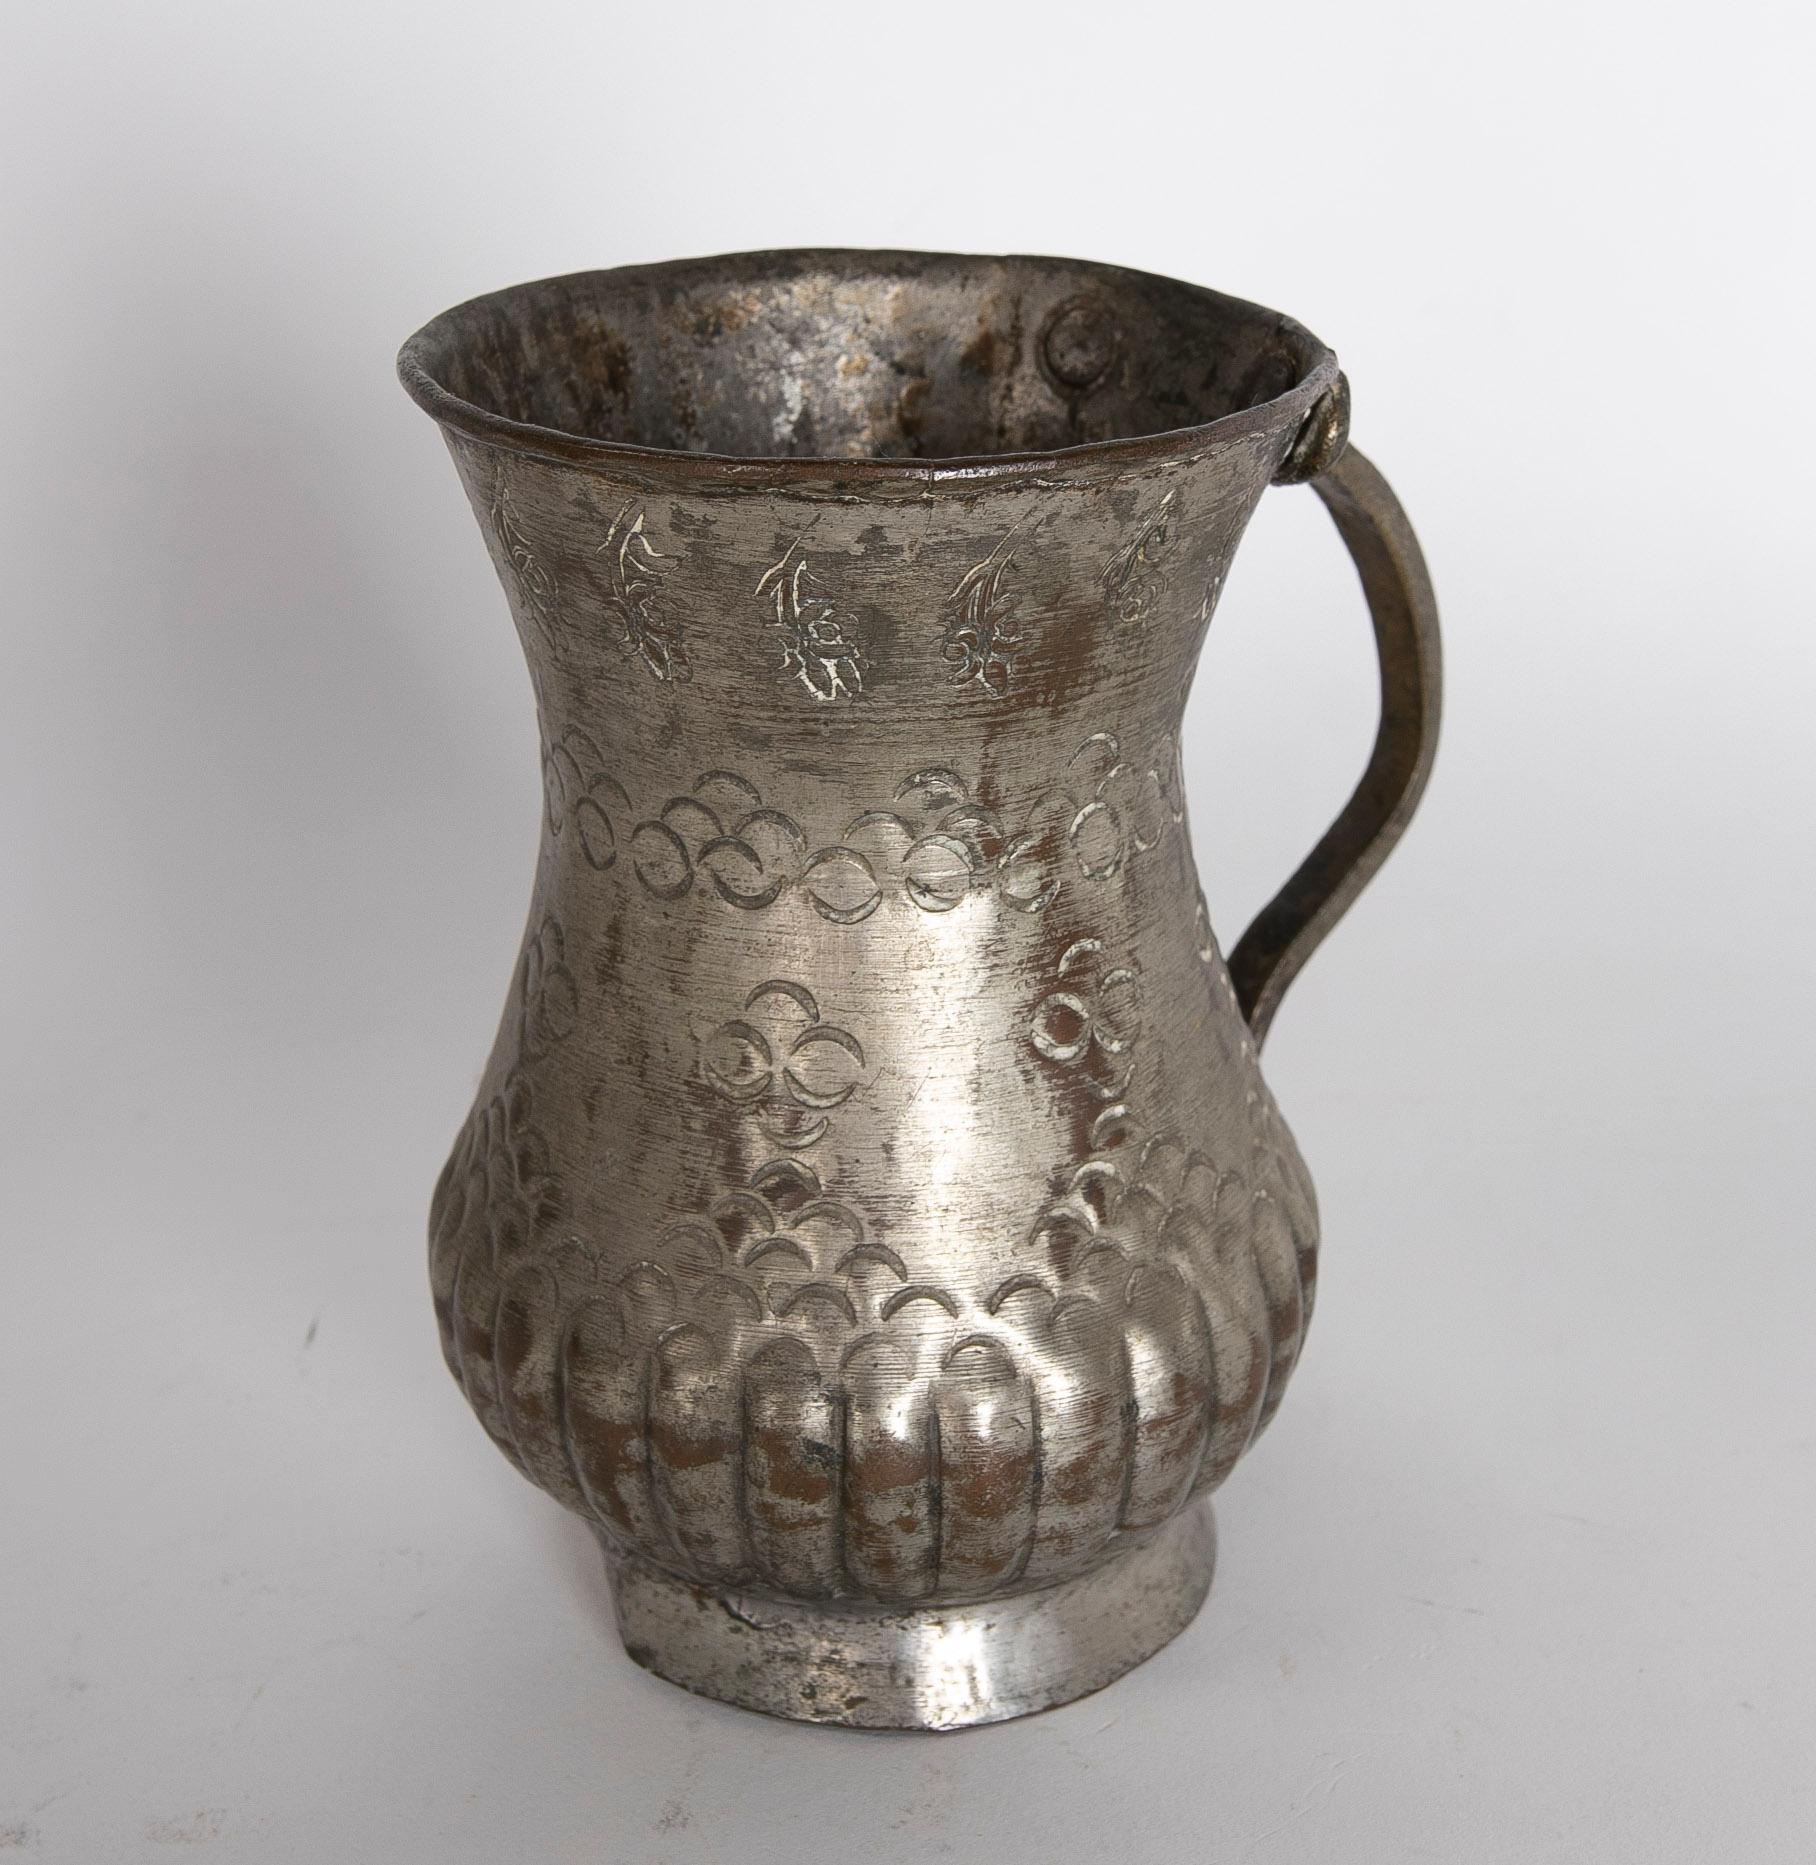 20th Century Turkish Embossed Copper Jug with Handle